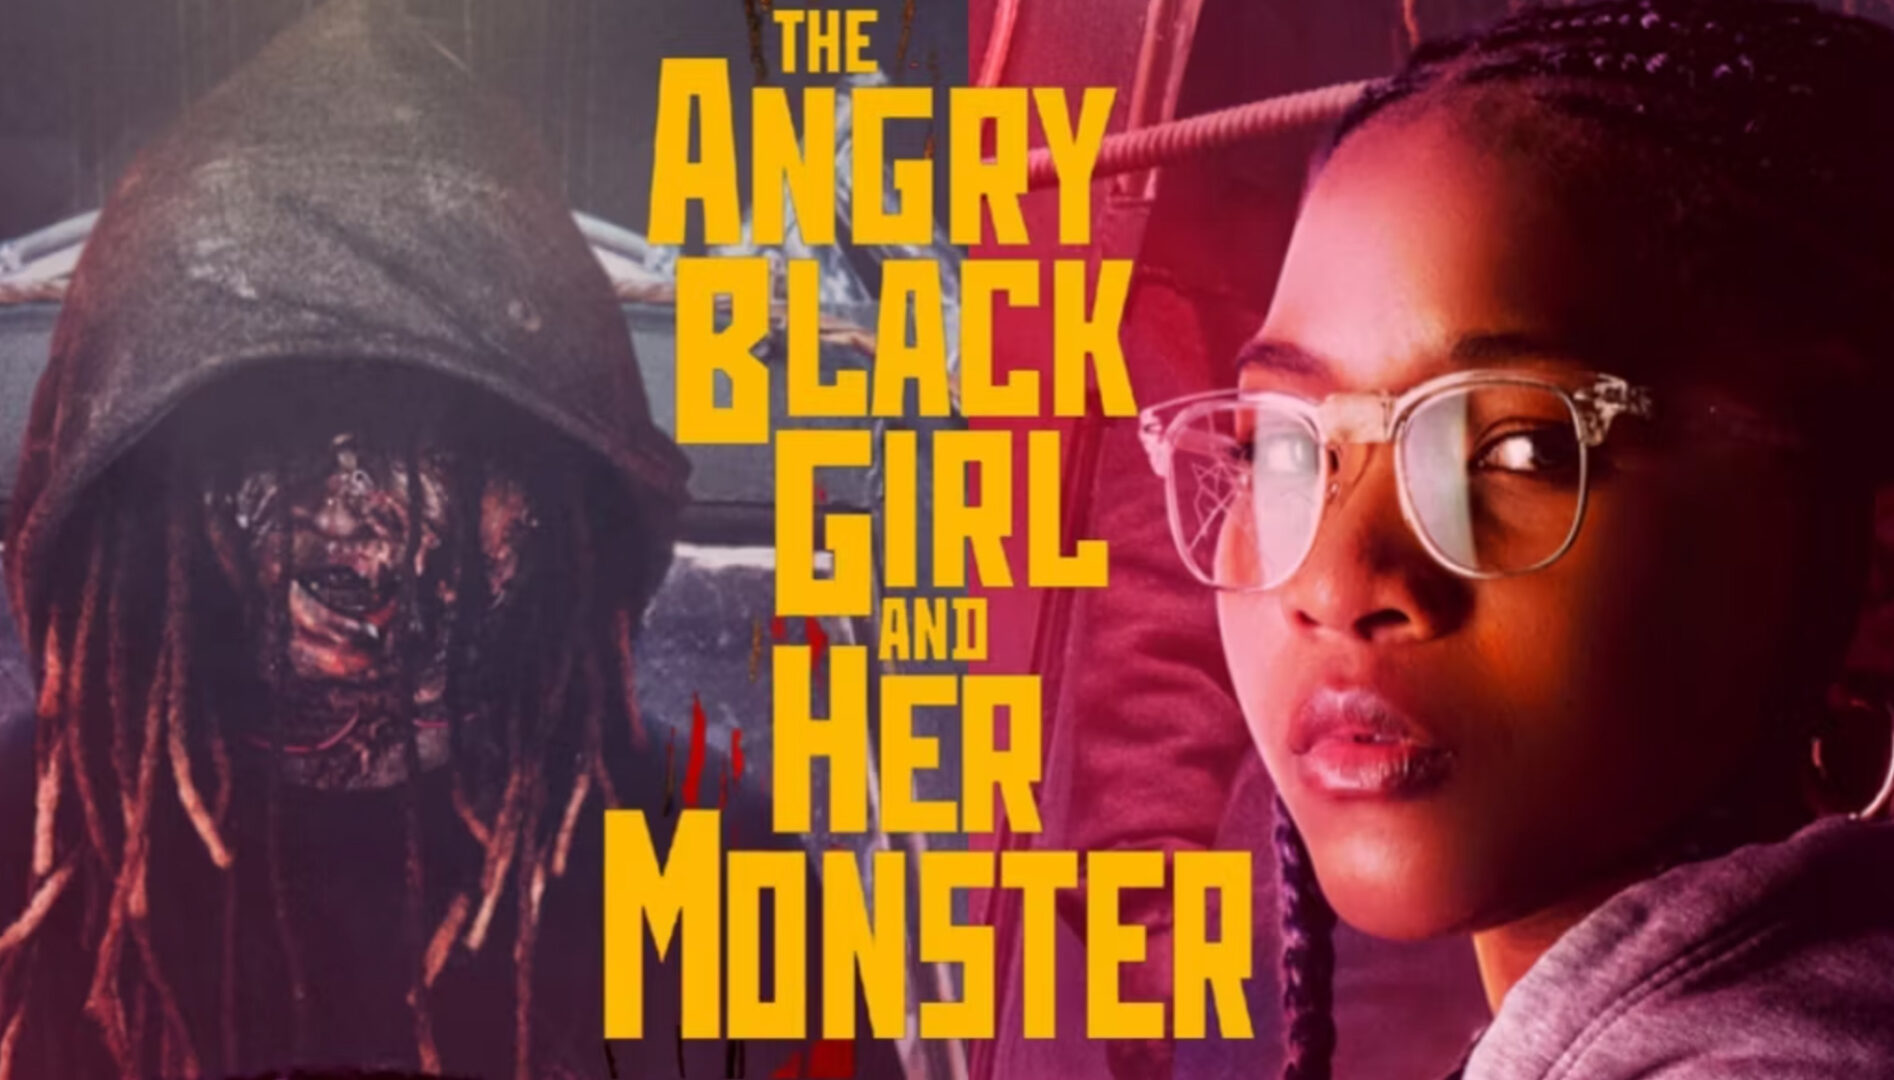 Photos from the movie The Angry Black Girl and Her Monster